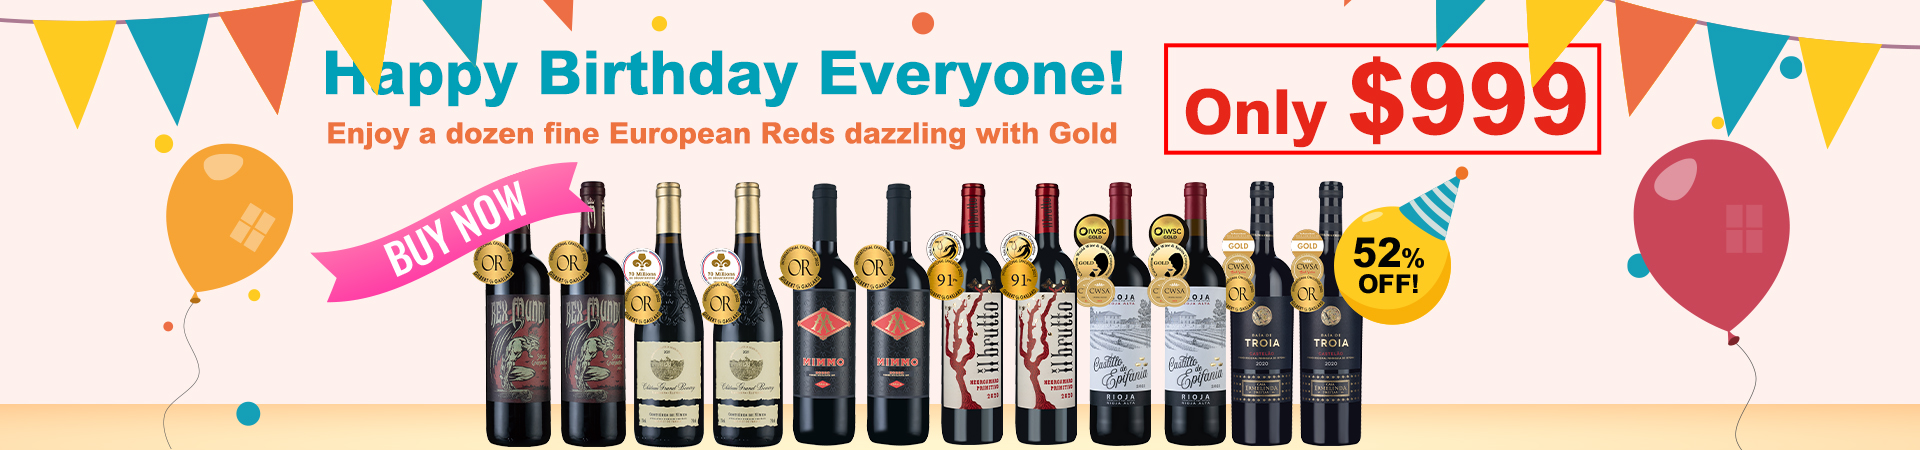 Happy People's Day ★ Special GOLD Reds deal